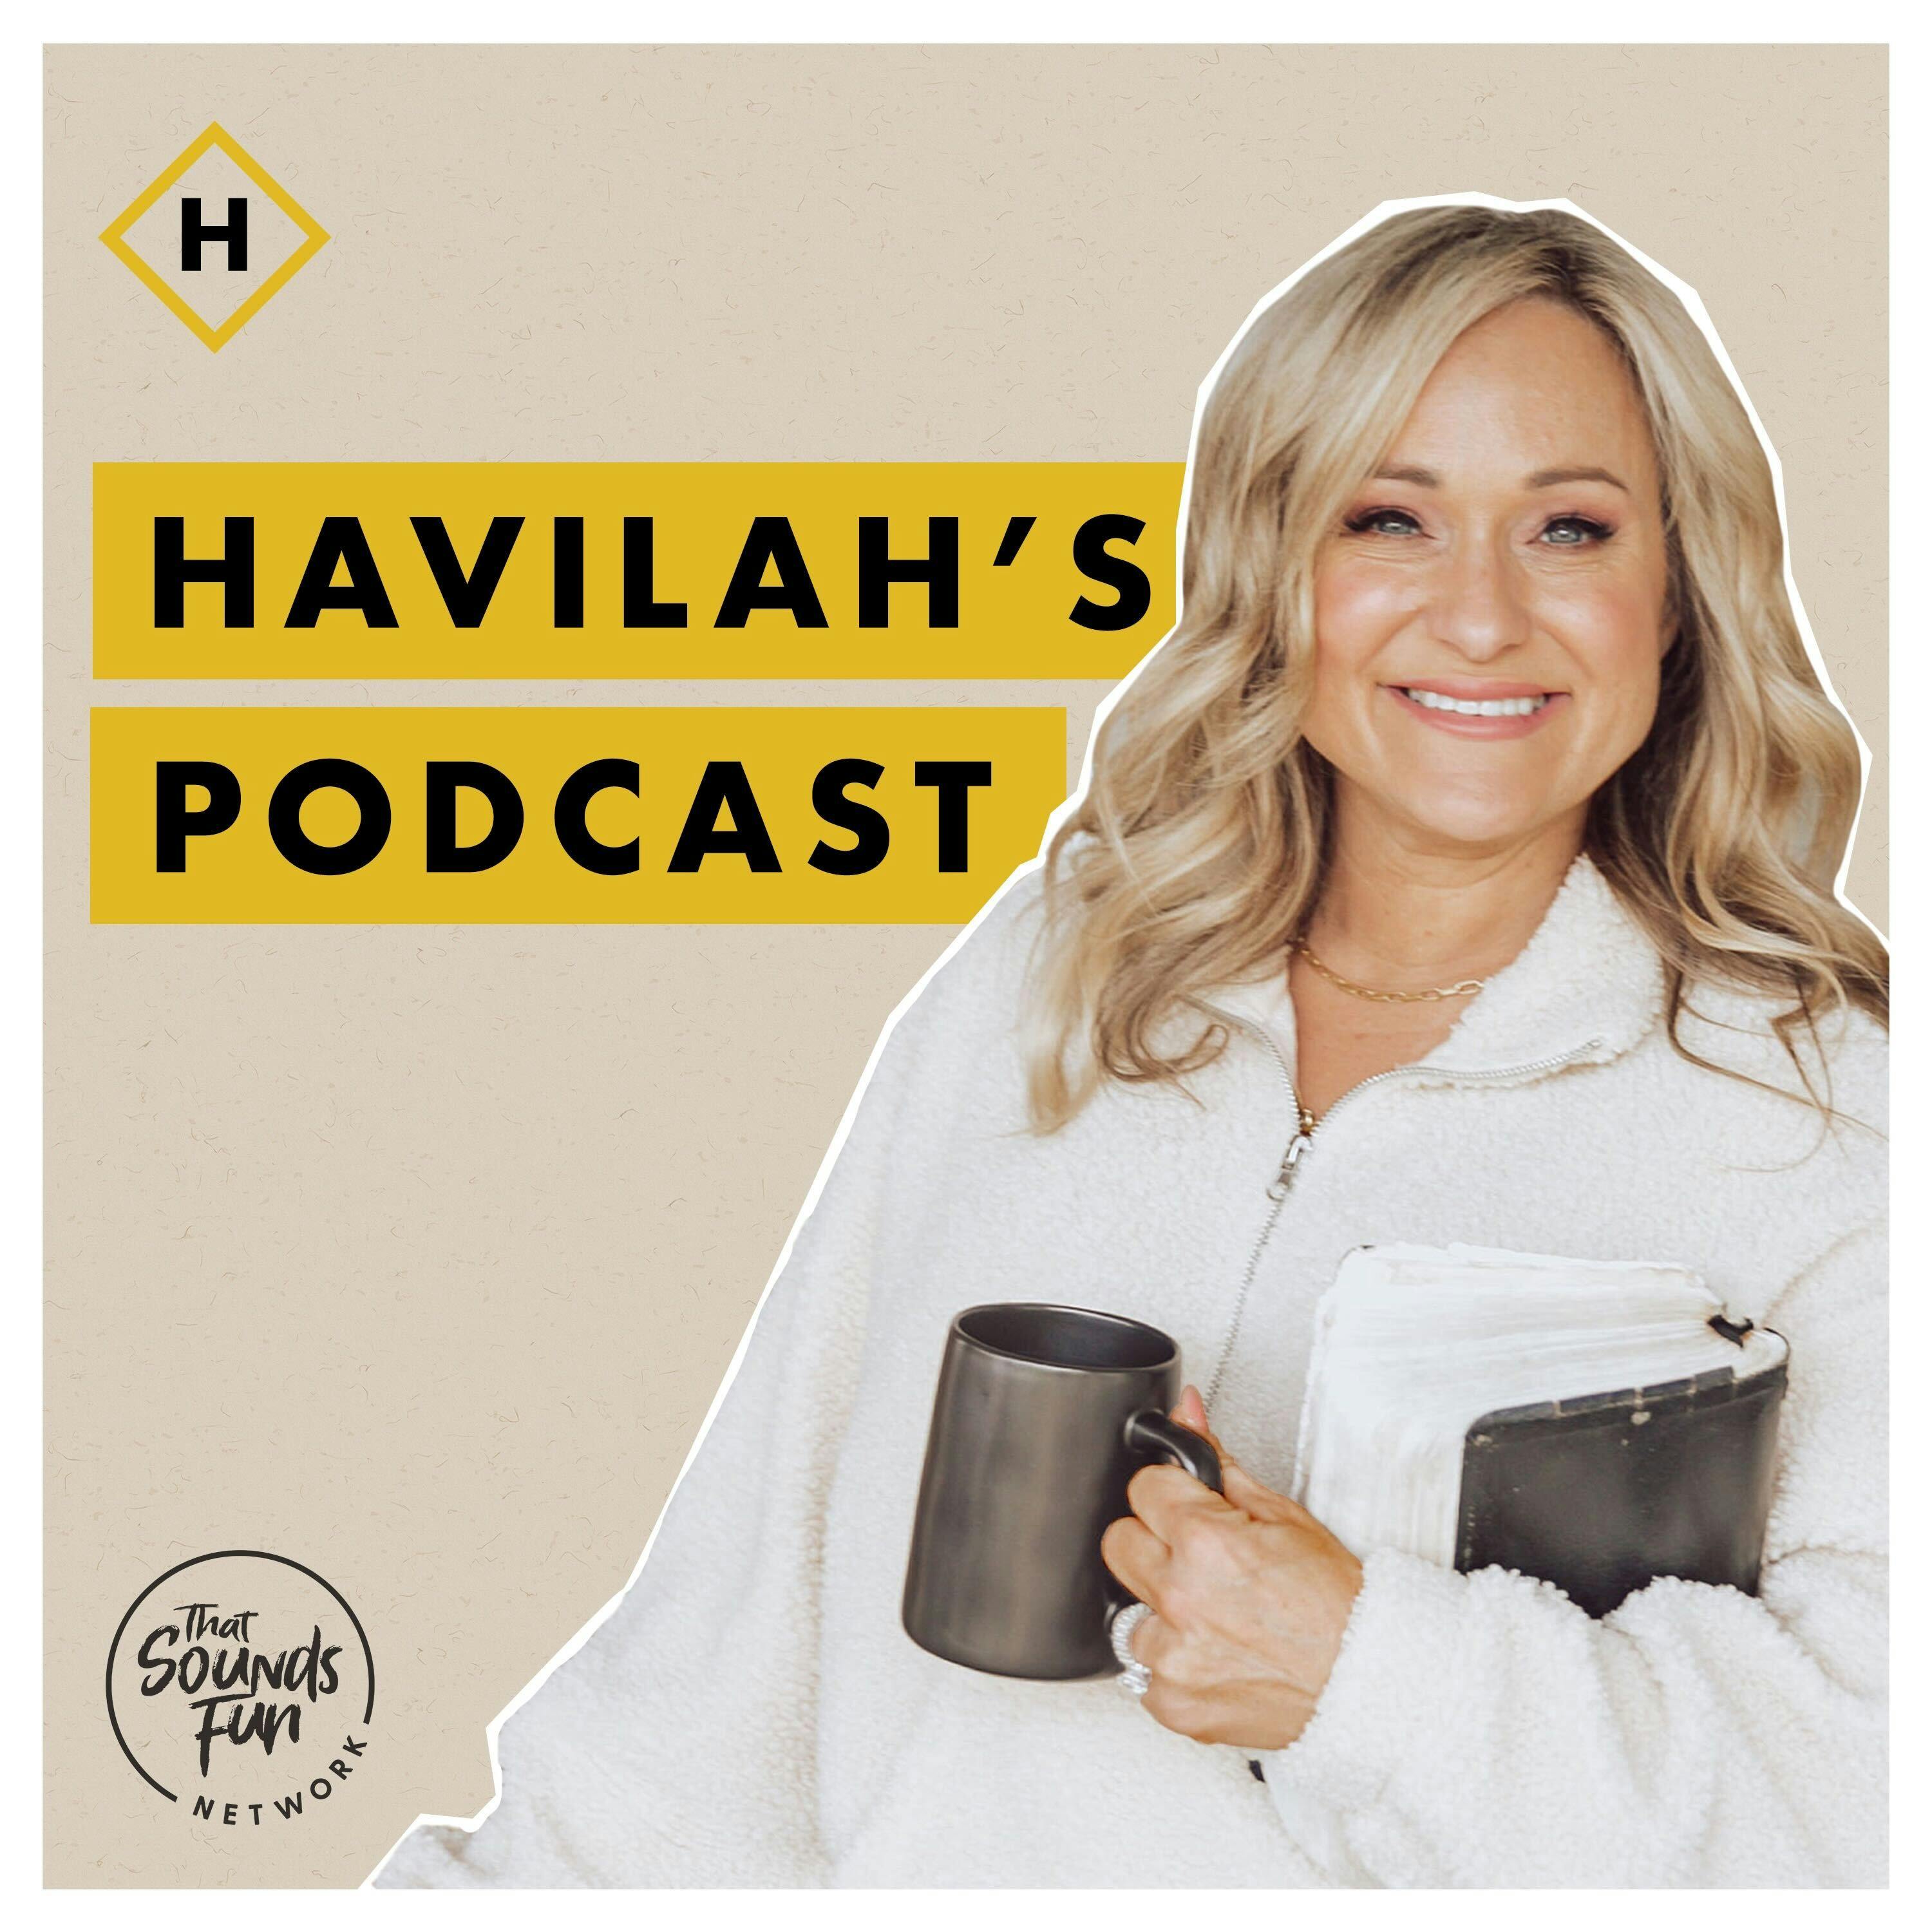 Welcome to Havilah's Podcast!